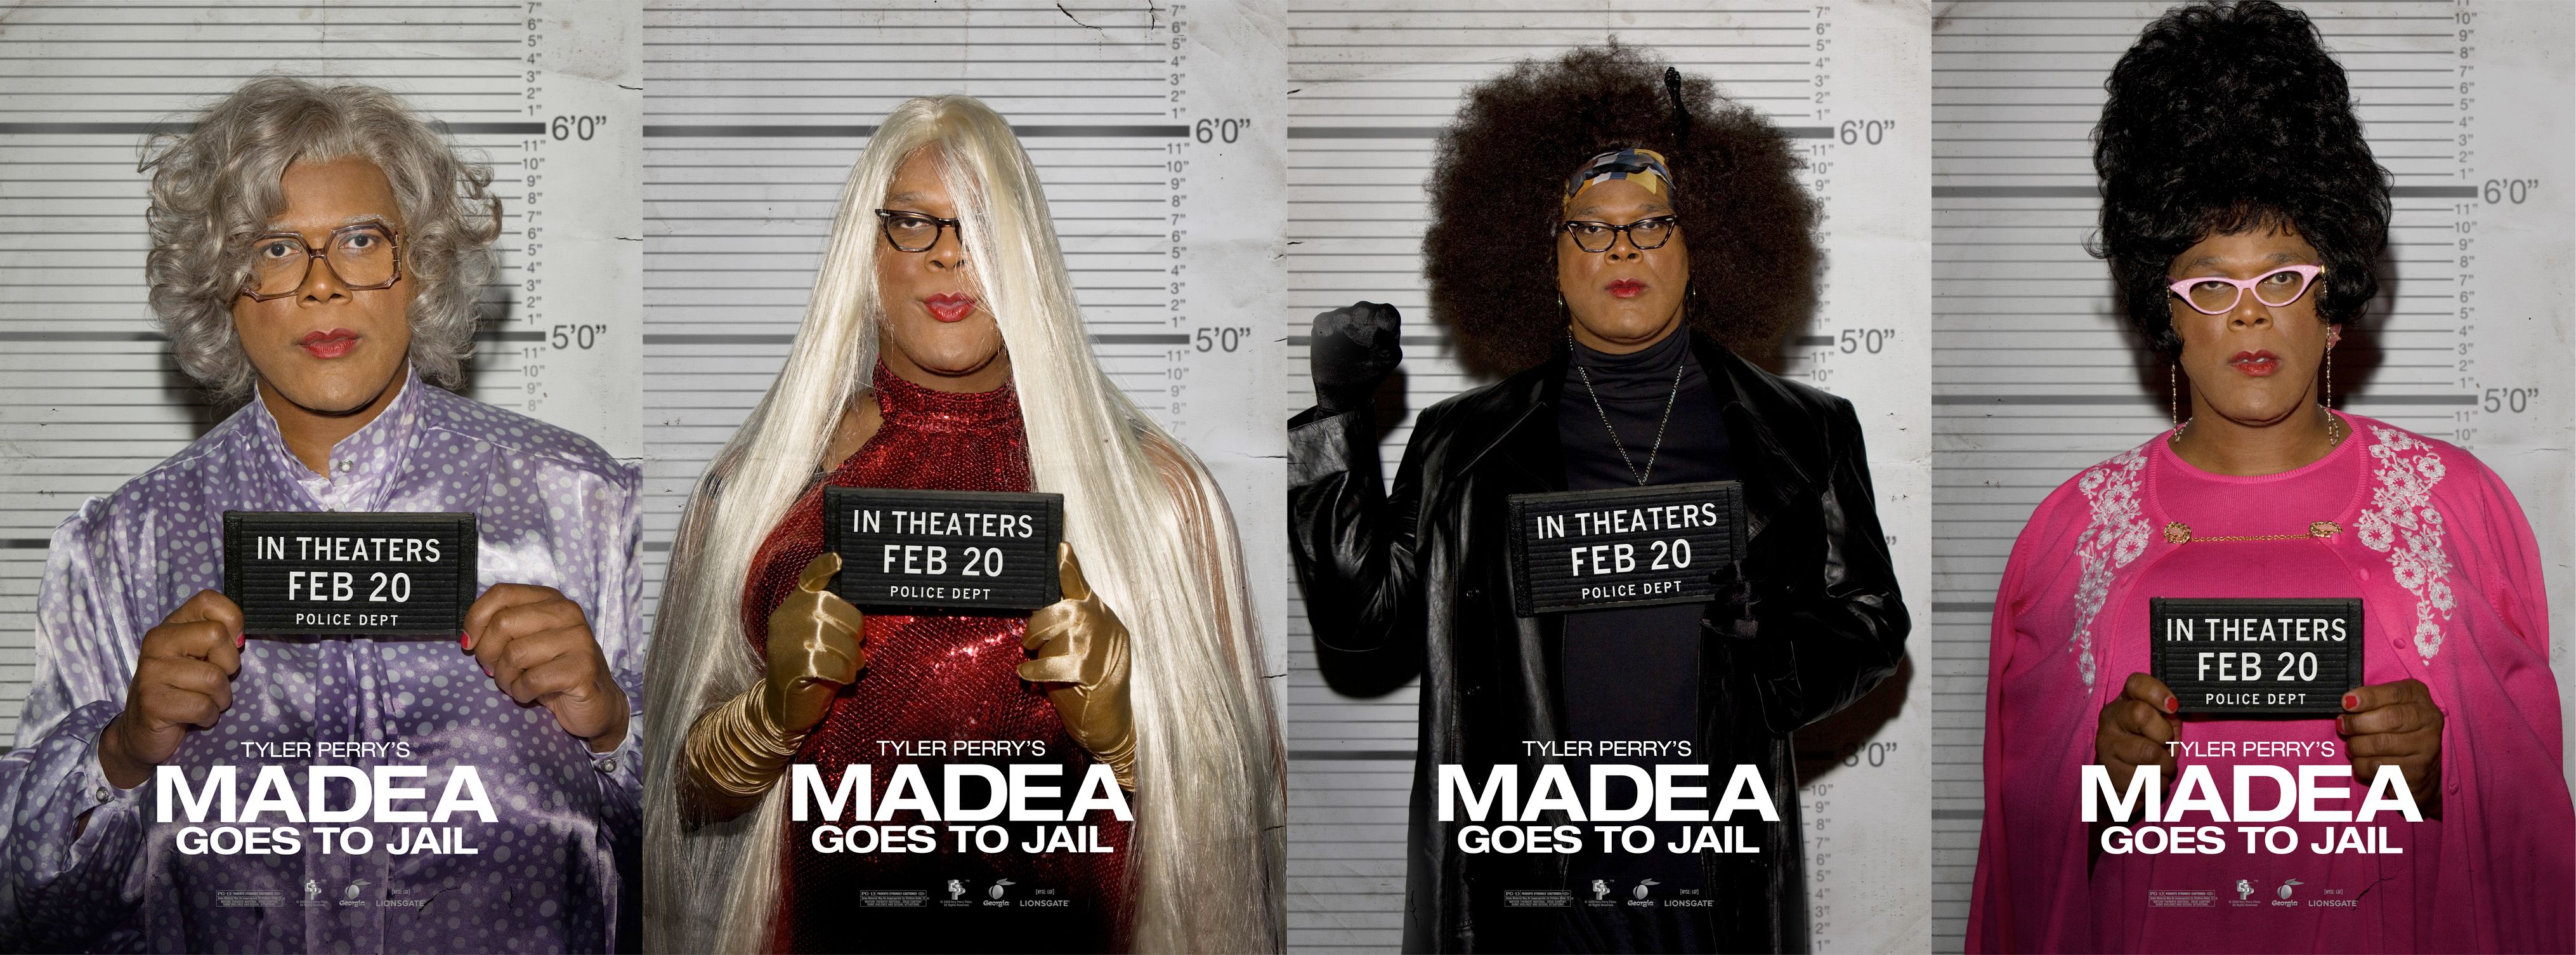 Tyler Perry's Madea Goes to Jail Exclusive Posters